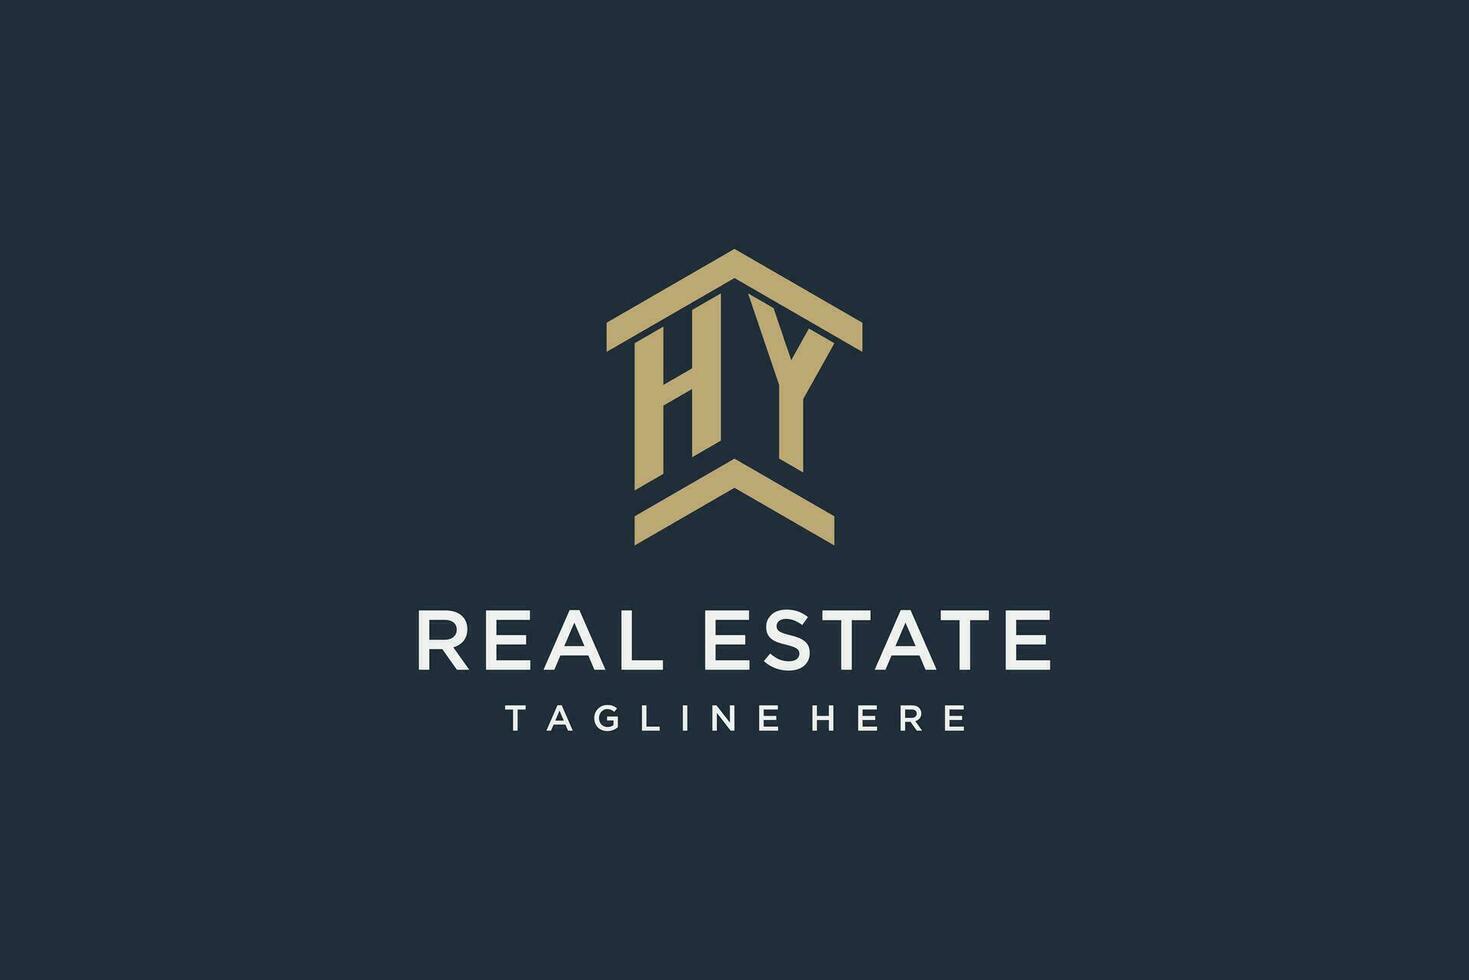 Initial HY logo for real estate with simple and creative house roof icon logo design ideas vector